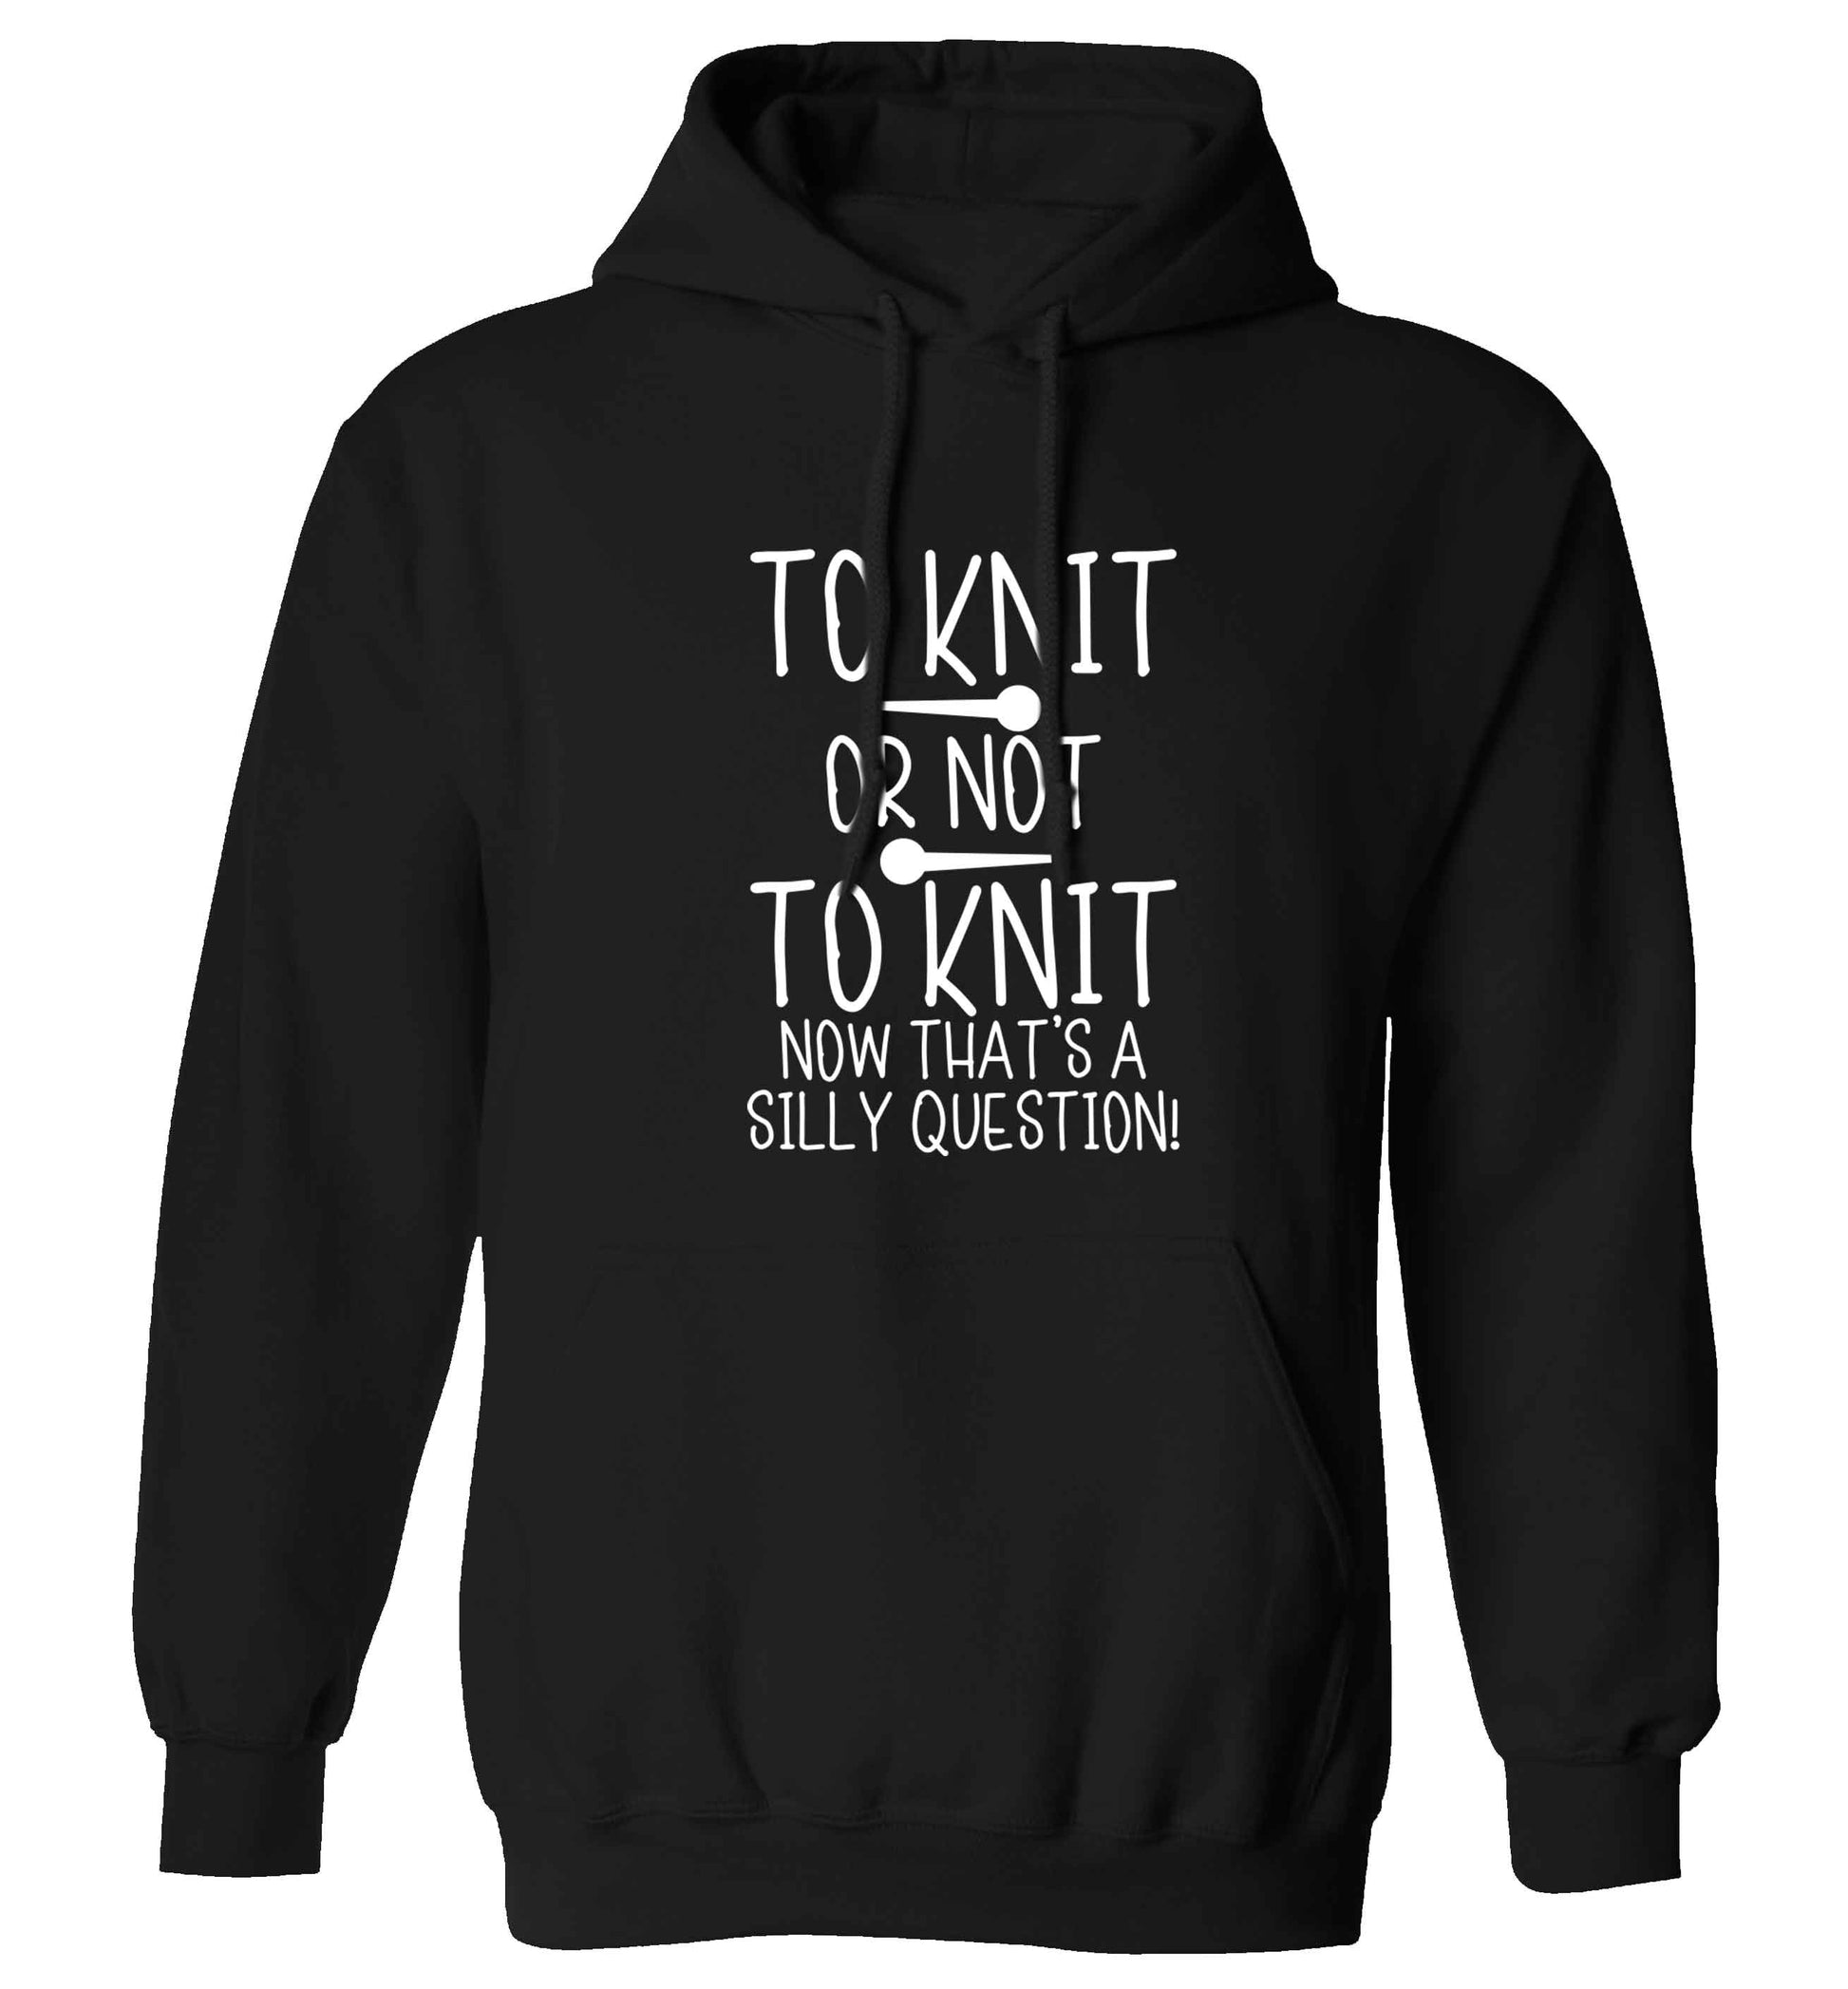 To knit or not to knit now that's a silly question adults unisex black hoodie 2XL